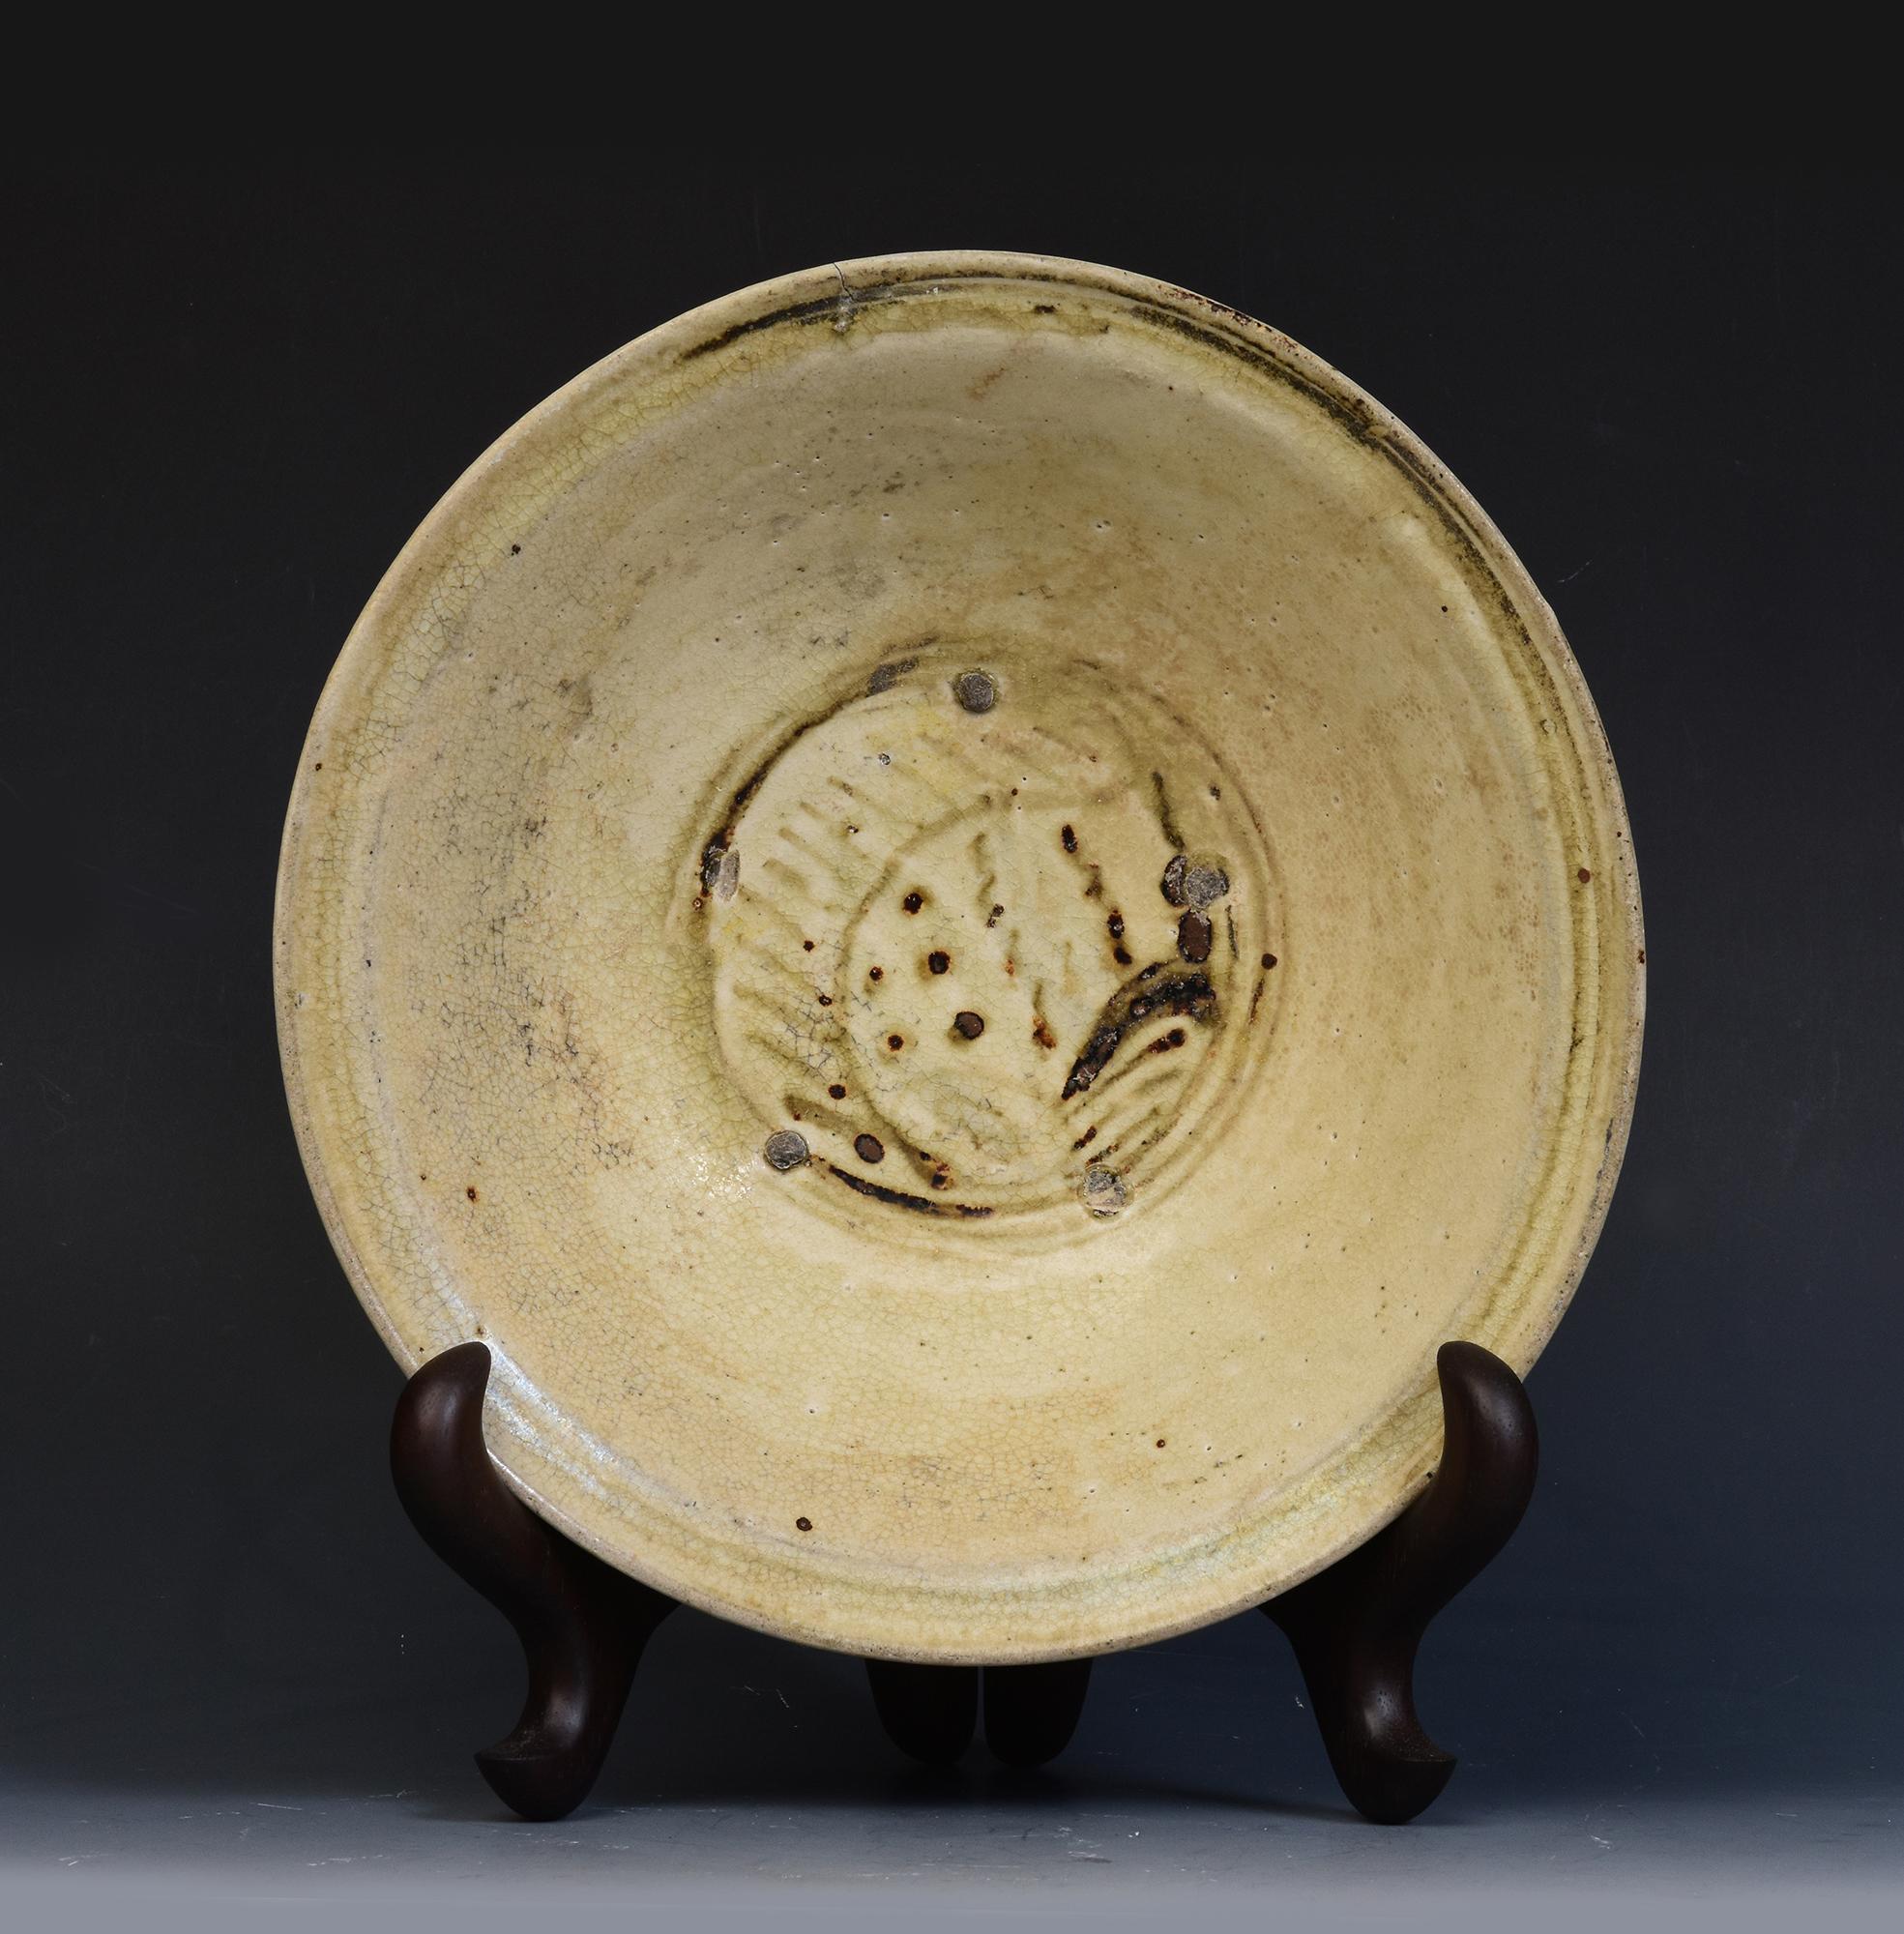 Antique Sukhothai glazed ceramic fish dish.

Age: Thailand, Sukhothai Period, 14th - 16th Century
Size: Diameter 23.8 C.M. / Thickness 8.2 C.M. (size excluding stand)
Condition: Nice glaze and condition overall (natural minor cracks on the